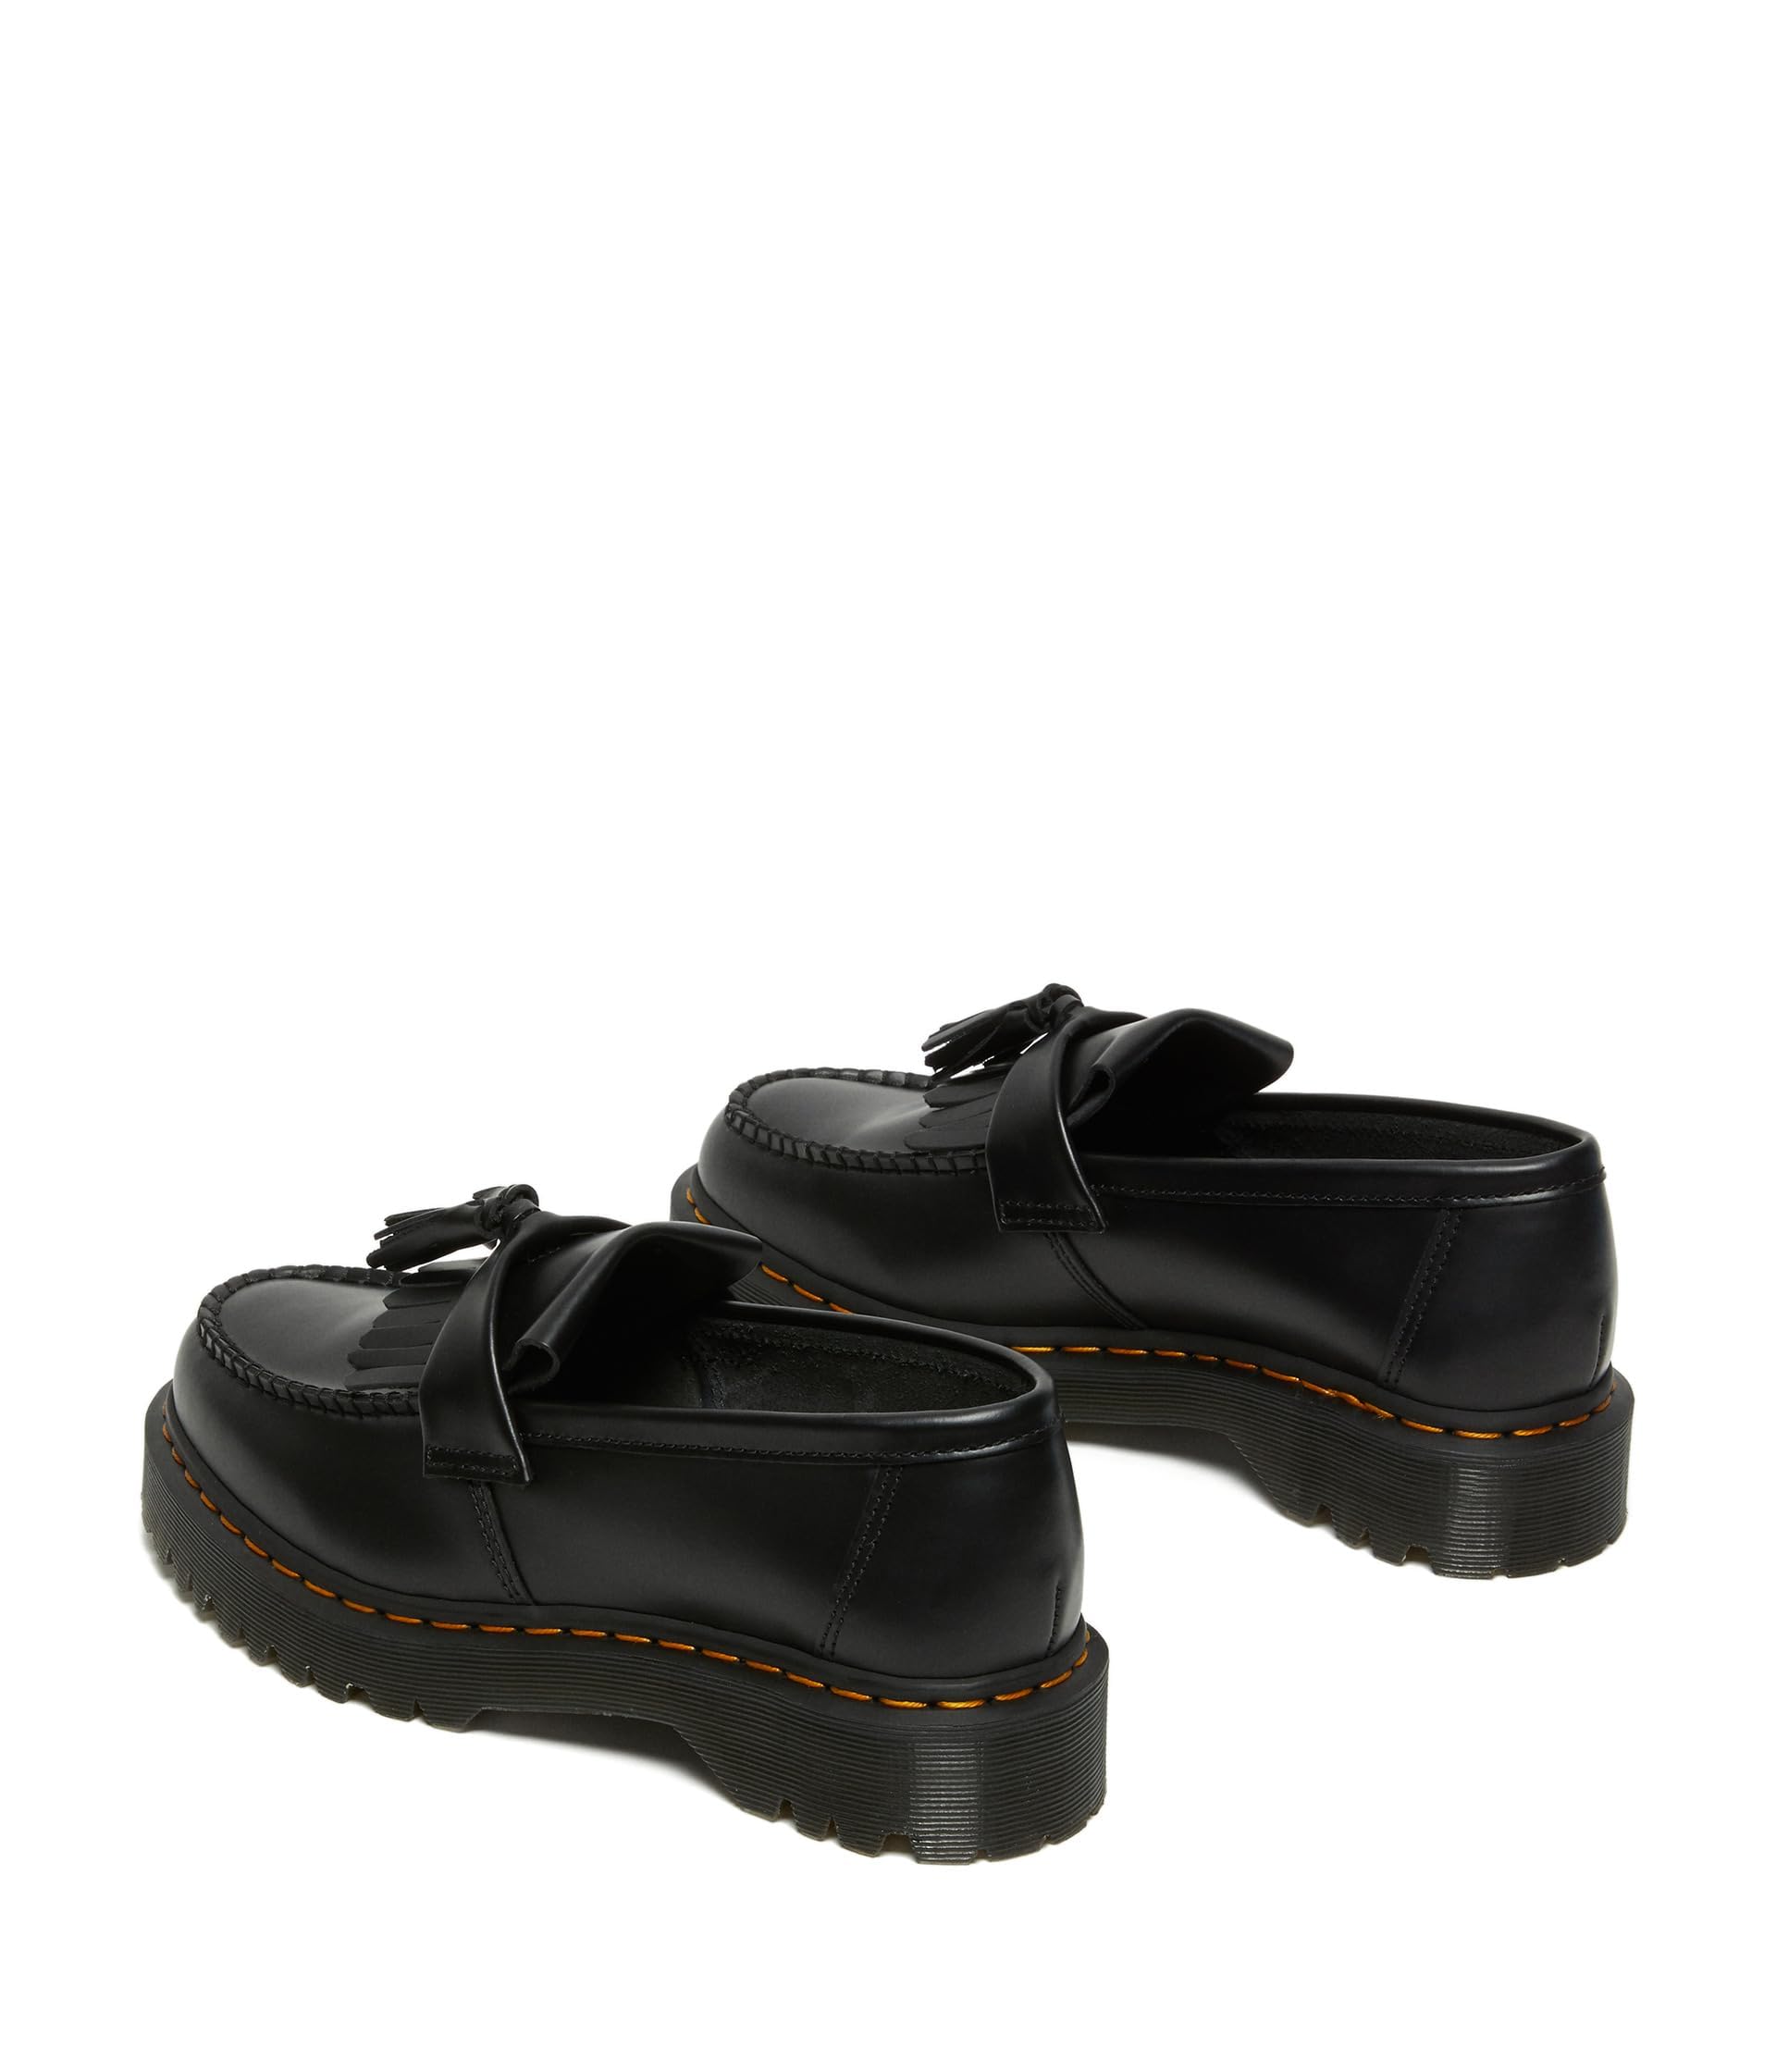 Dr. Martens Unisex-Adult Adrian Bex Smooth Leather Tassel Loafers